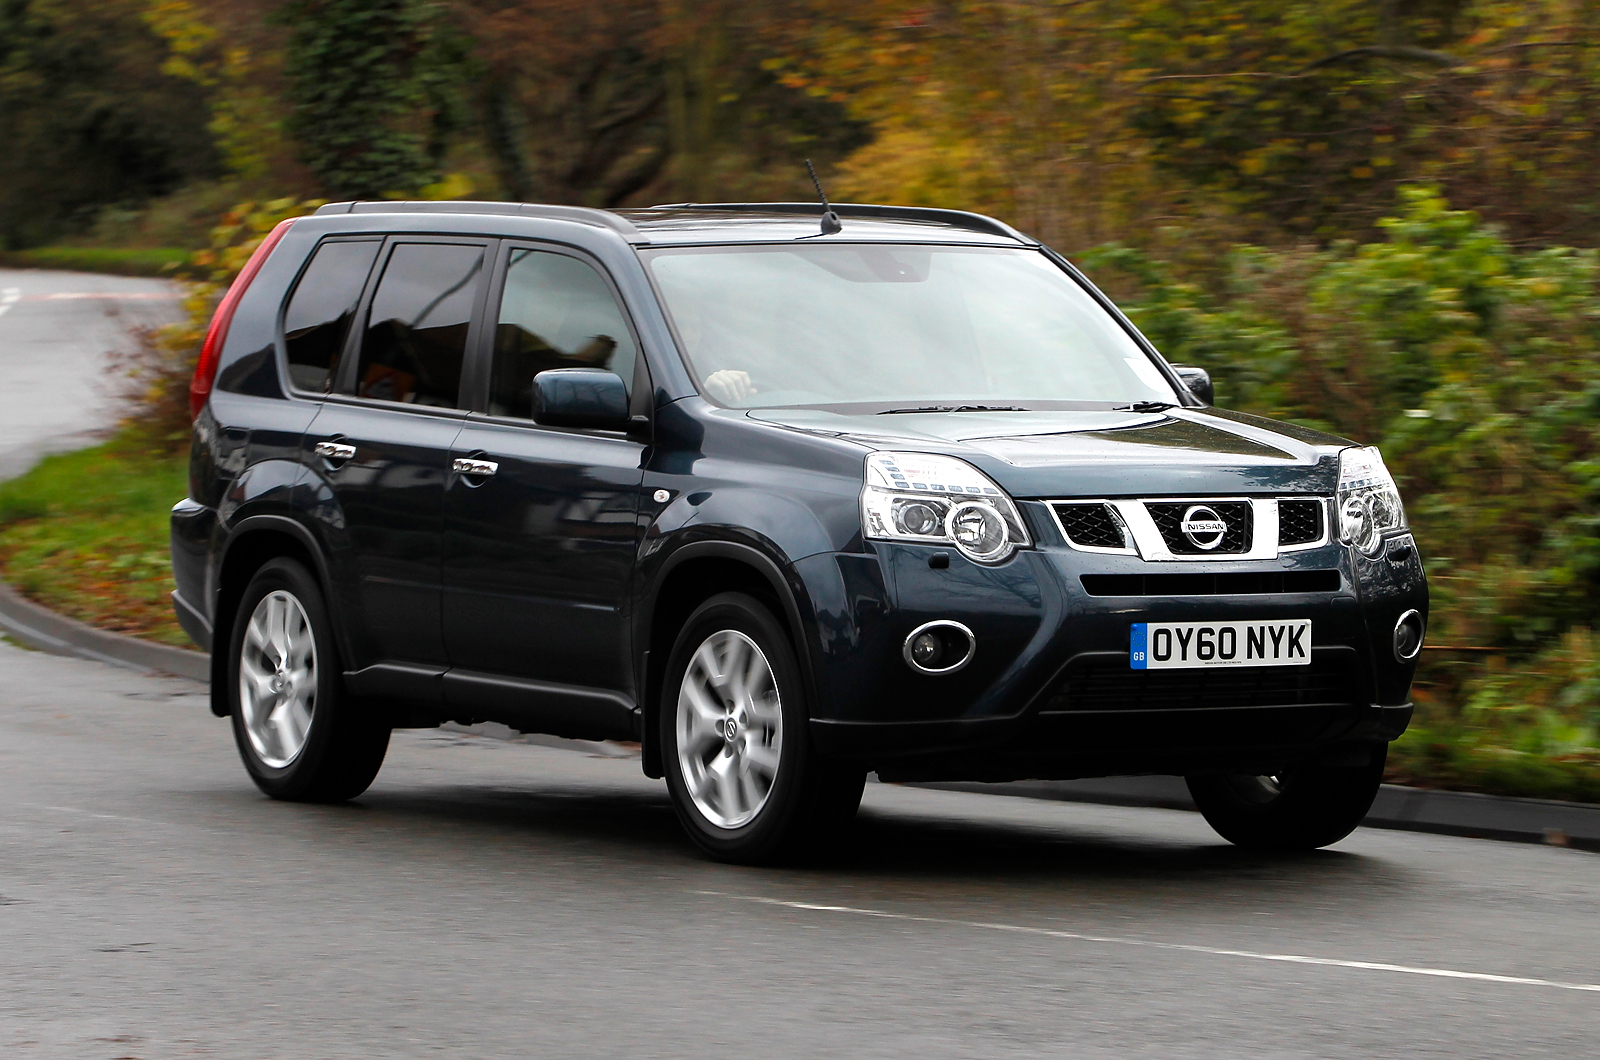 Review - 2011 Nissan X-TRAIL ST 2WD Review and Road Test